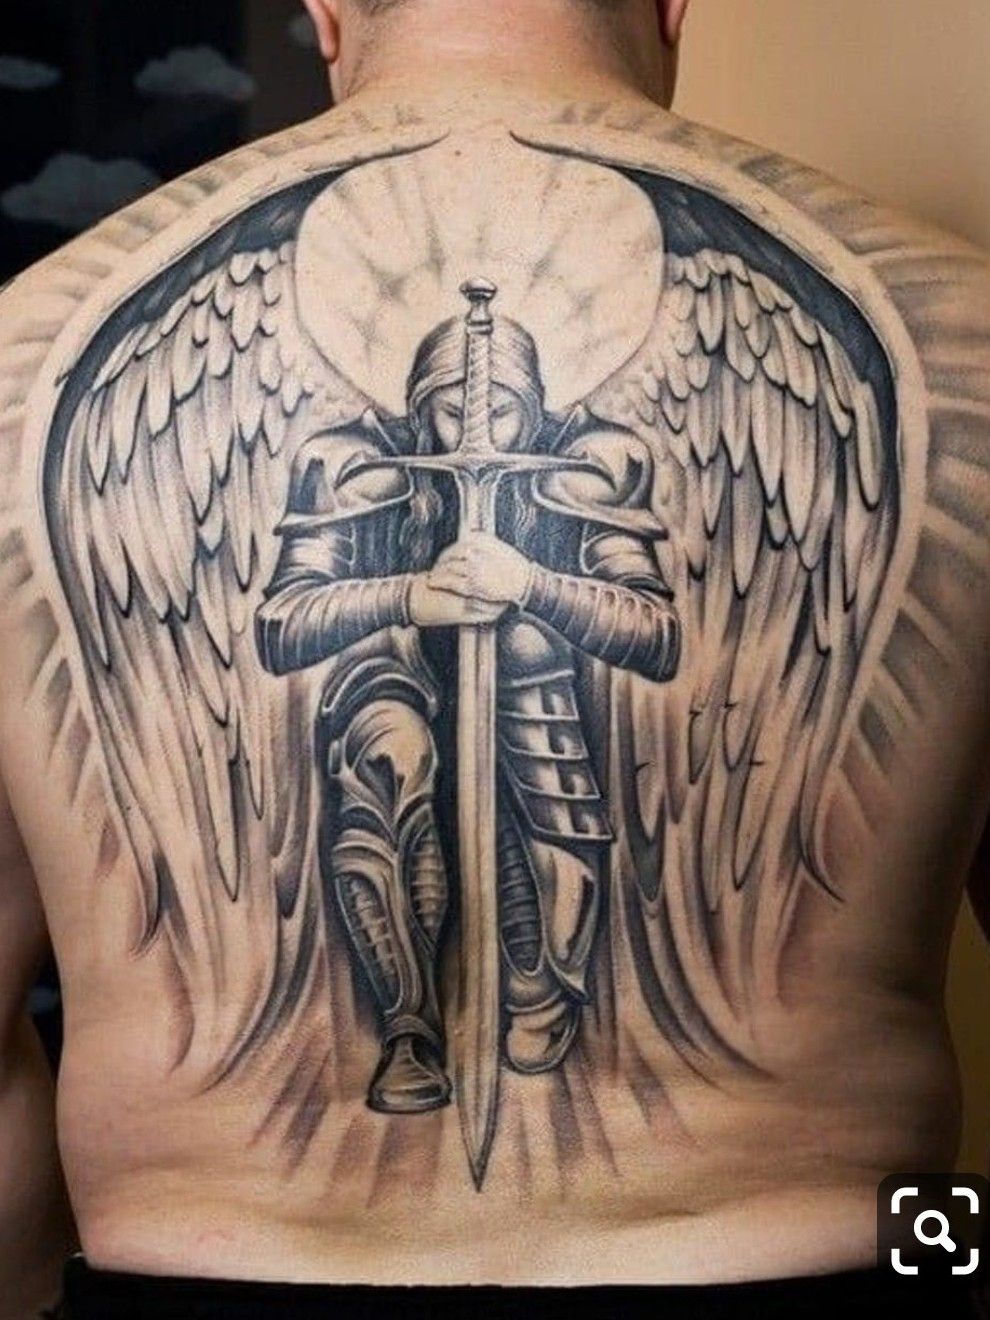 75 Mind-Blowing Saint Michael Tattoos And Their Meaning - AuthorityTattoo